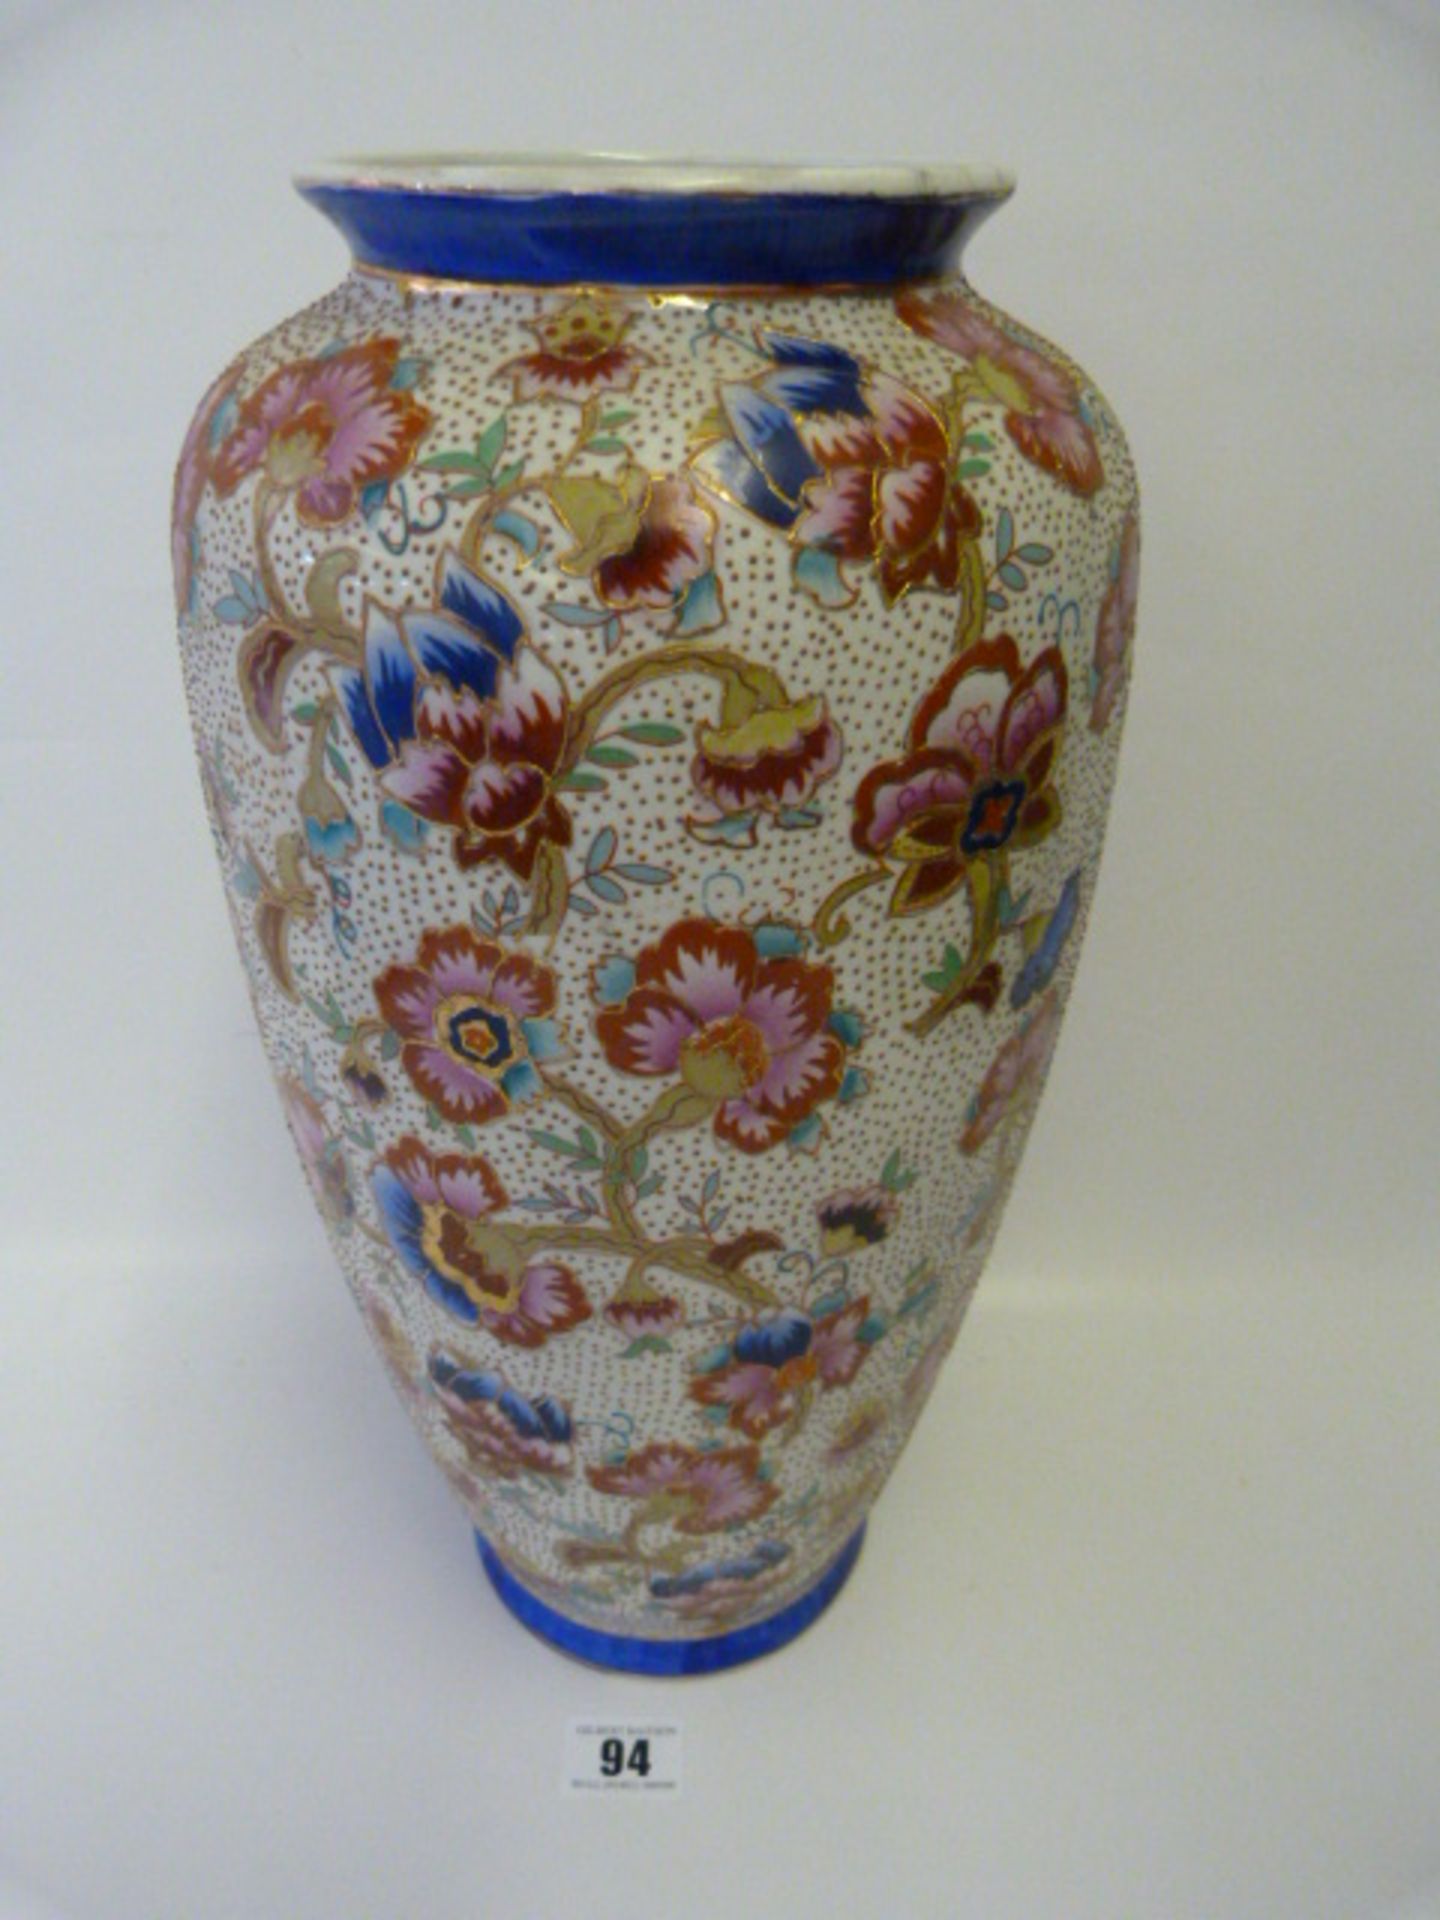 Large Chinese Style Floral Vase